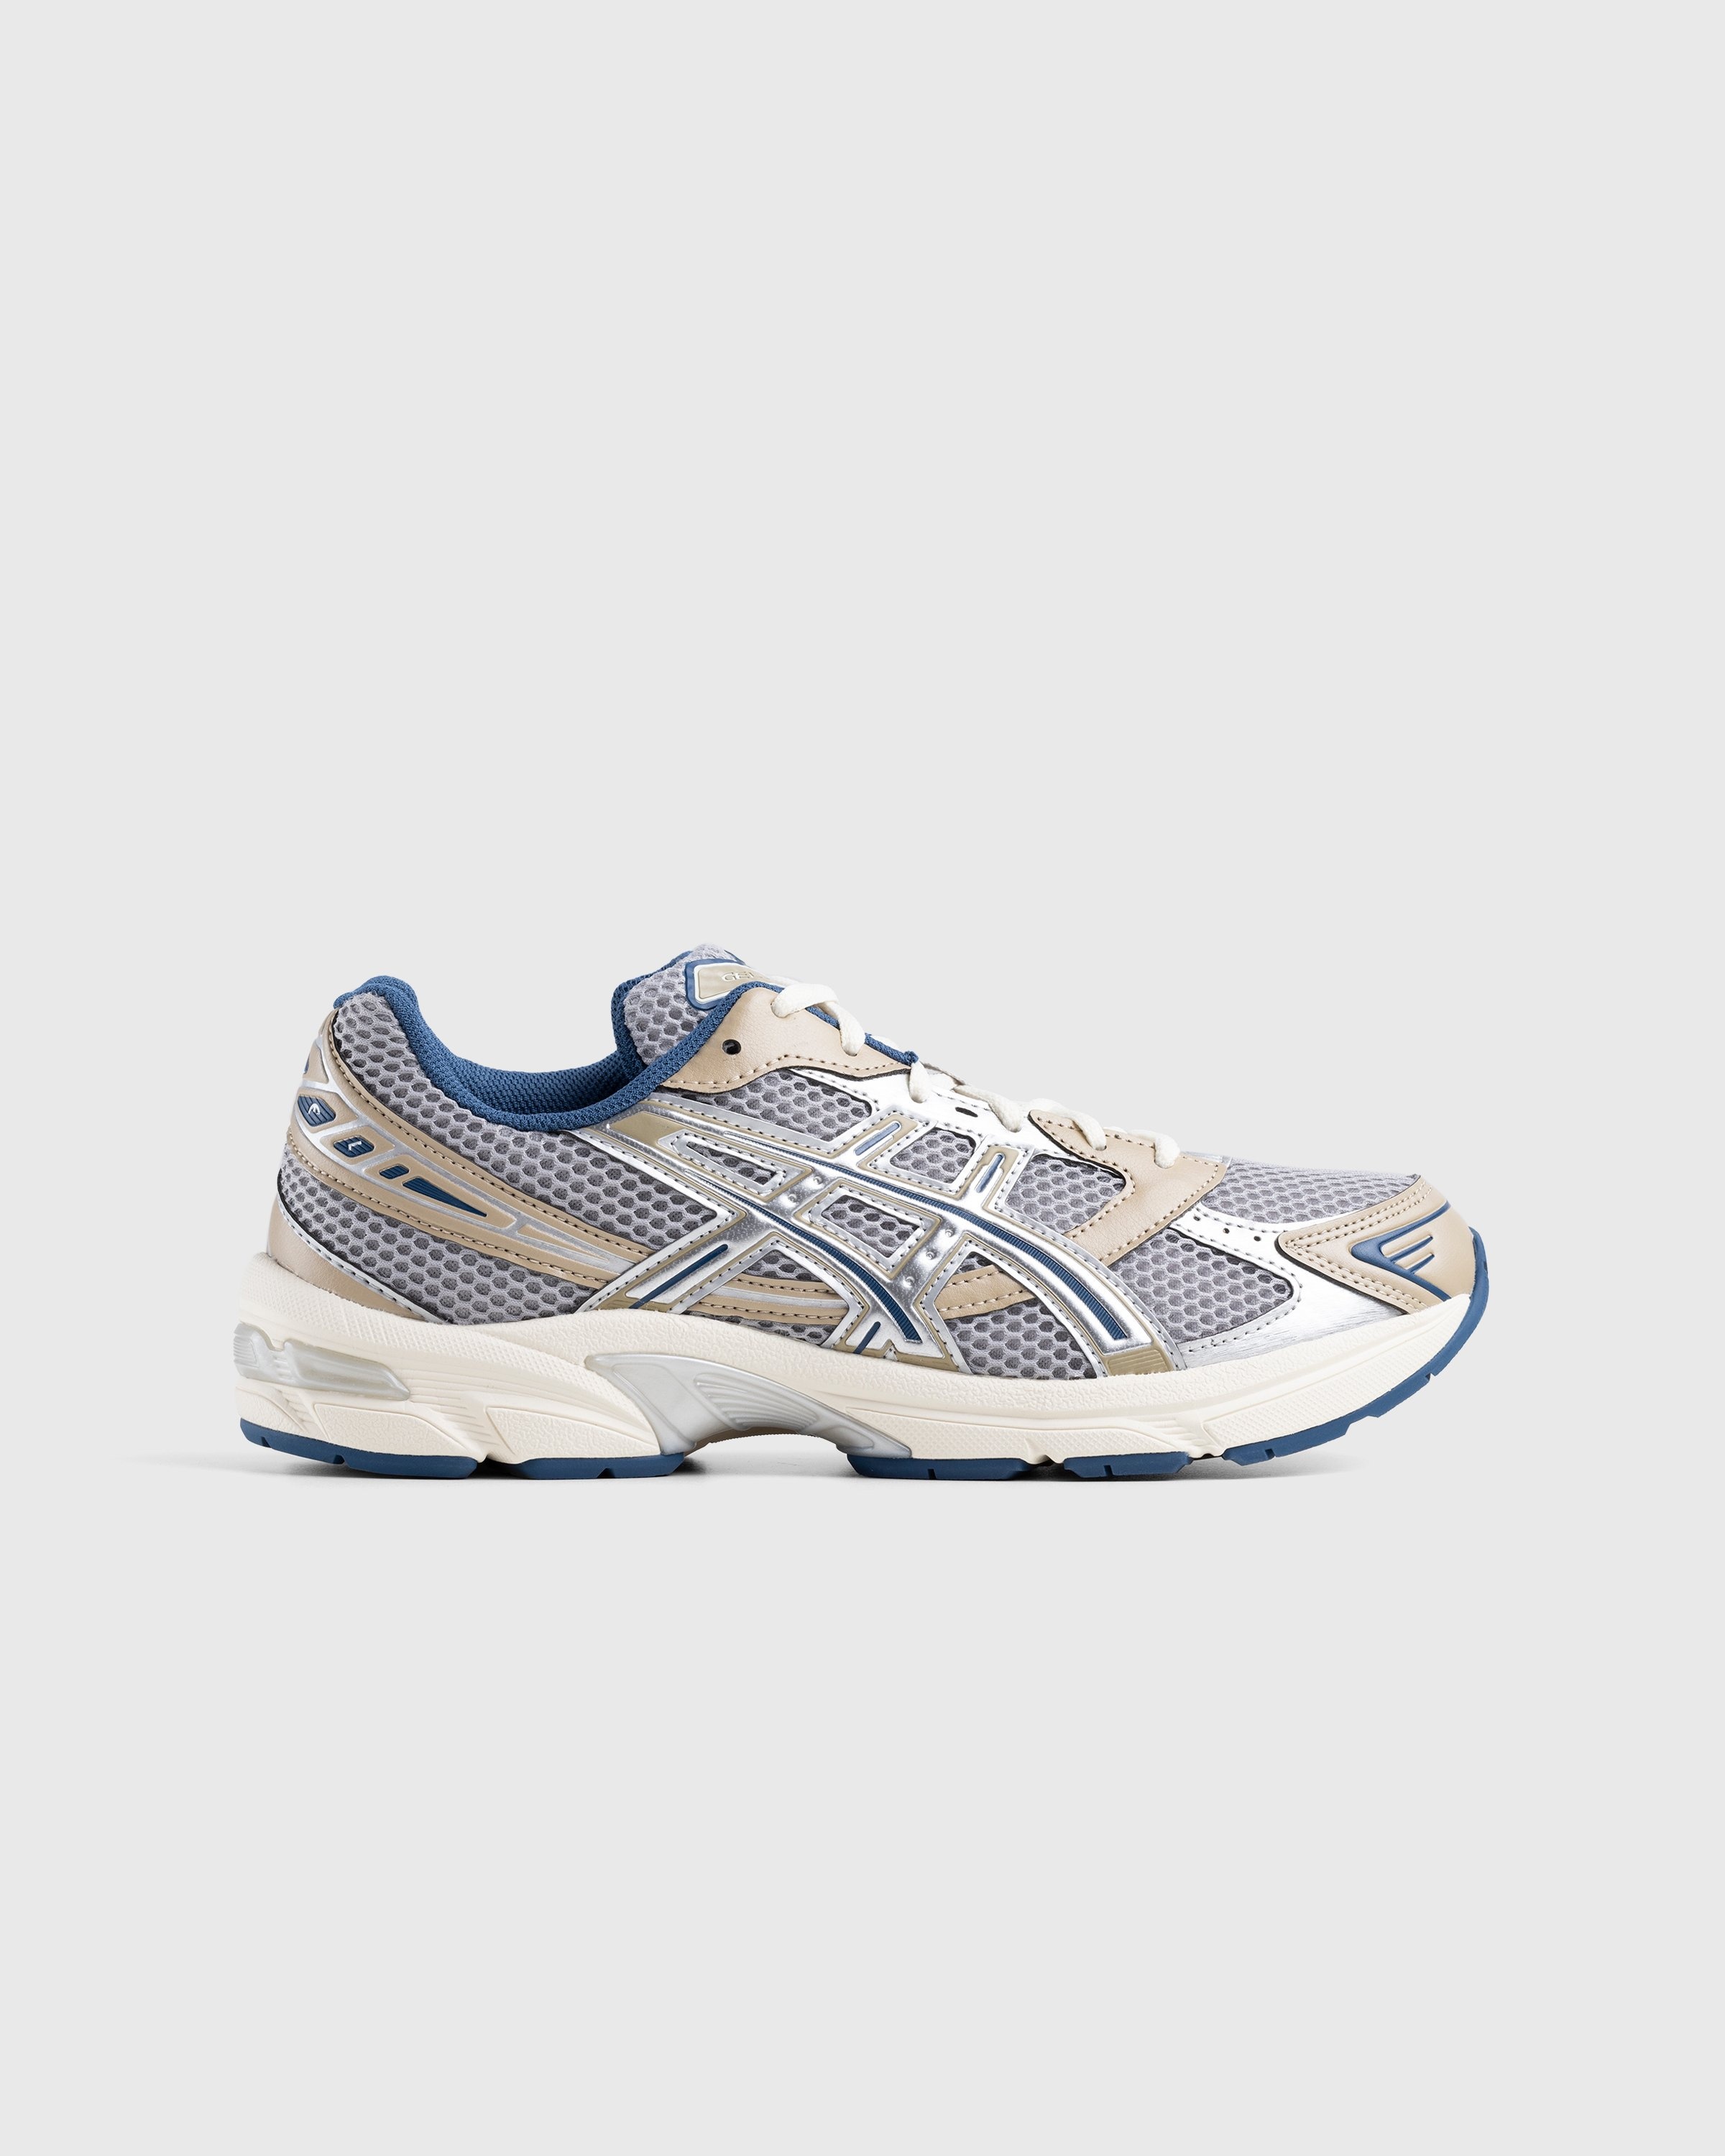 asics – Gel-1130 Oyster Grey Pure Silver - Low Top Sneakers - Beige - Image 1